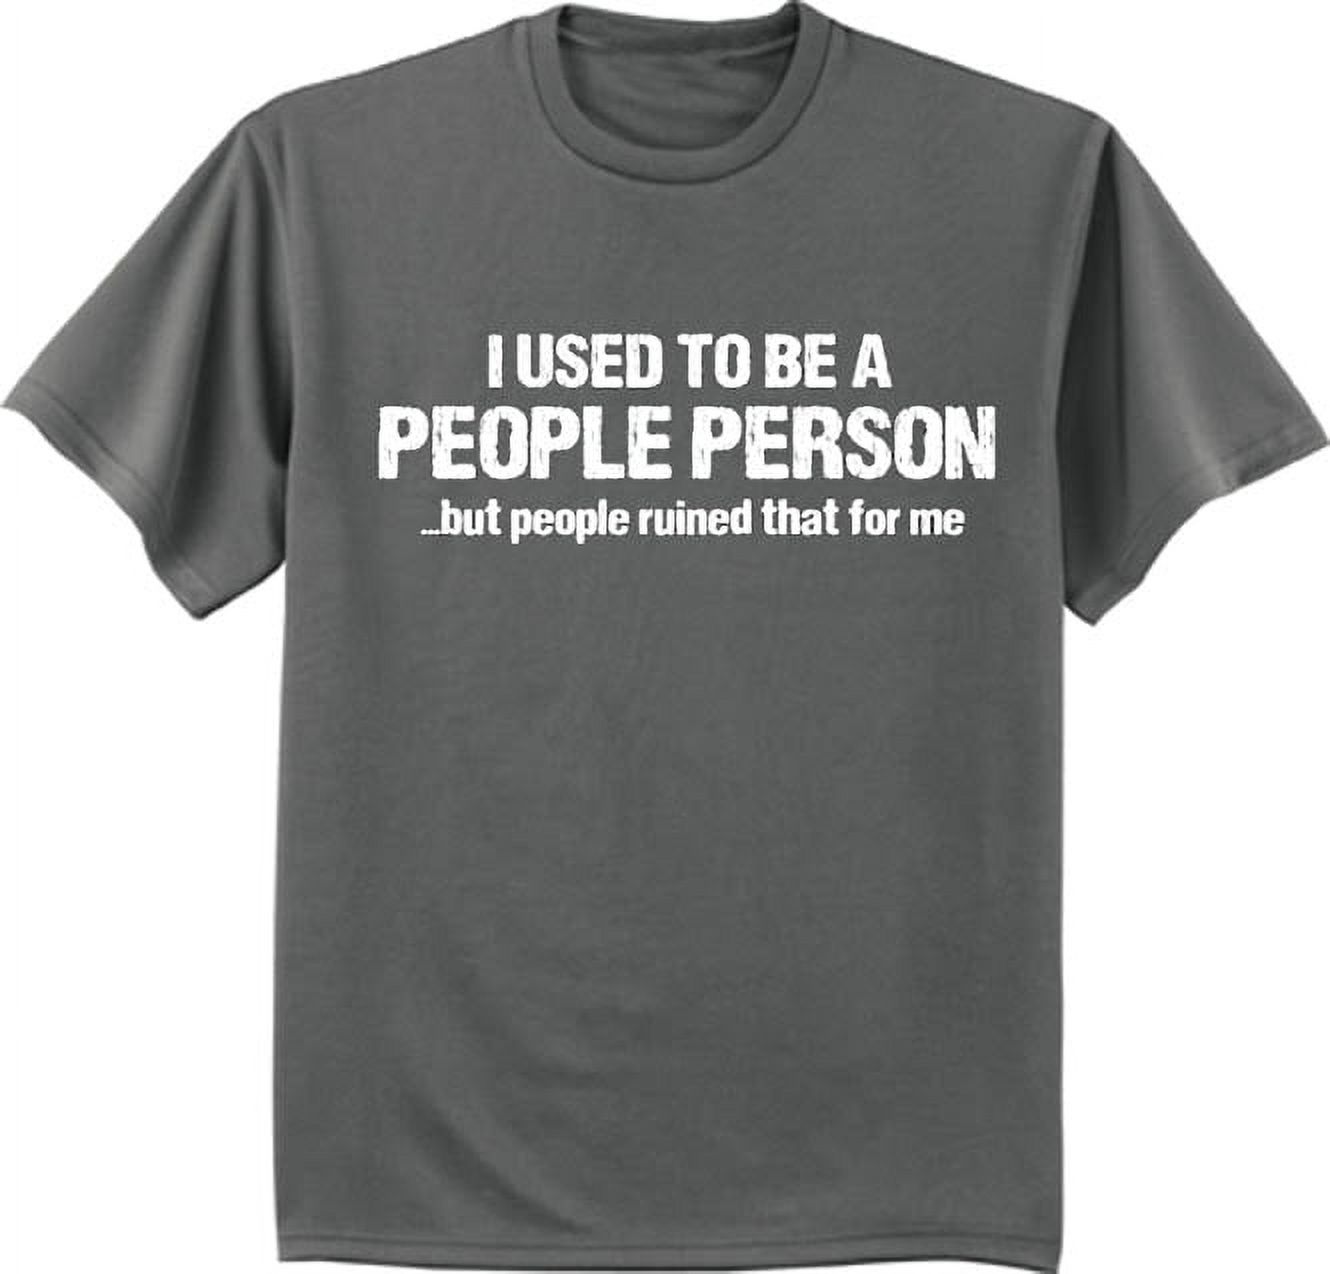 Not a people person funny t-shirt graphic tee for men - image 1 of 2